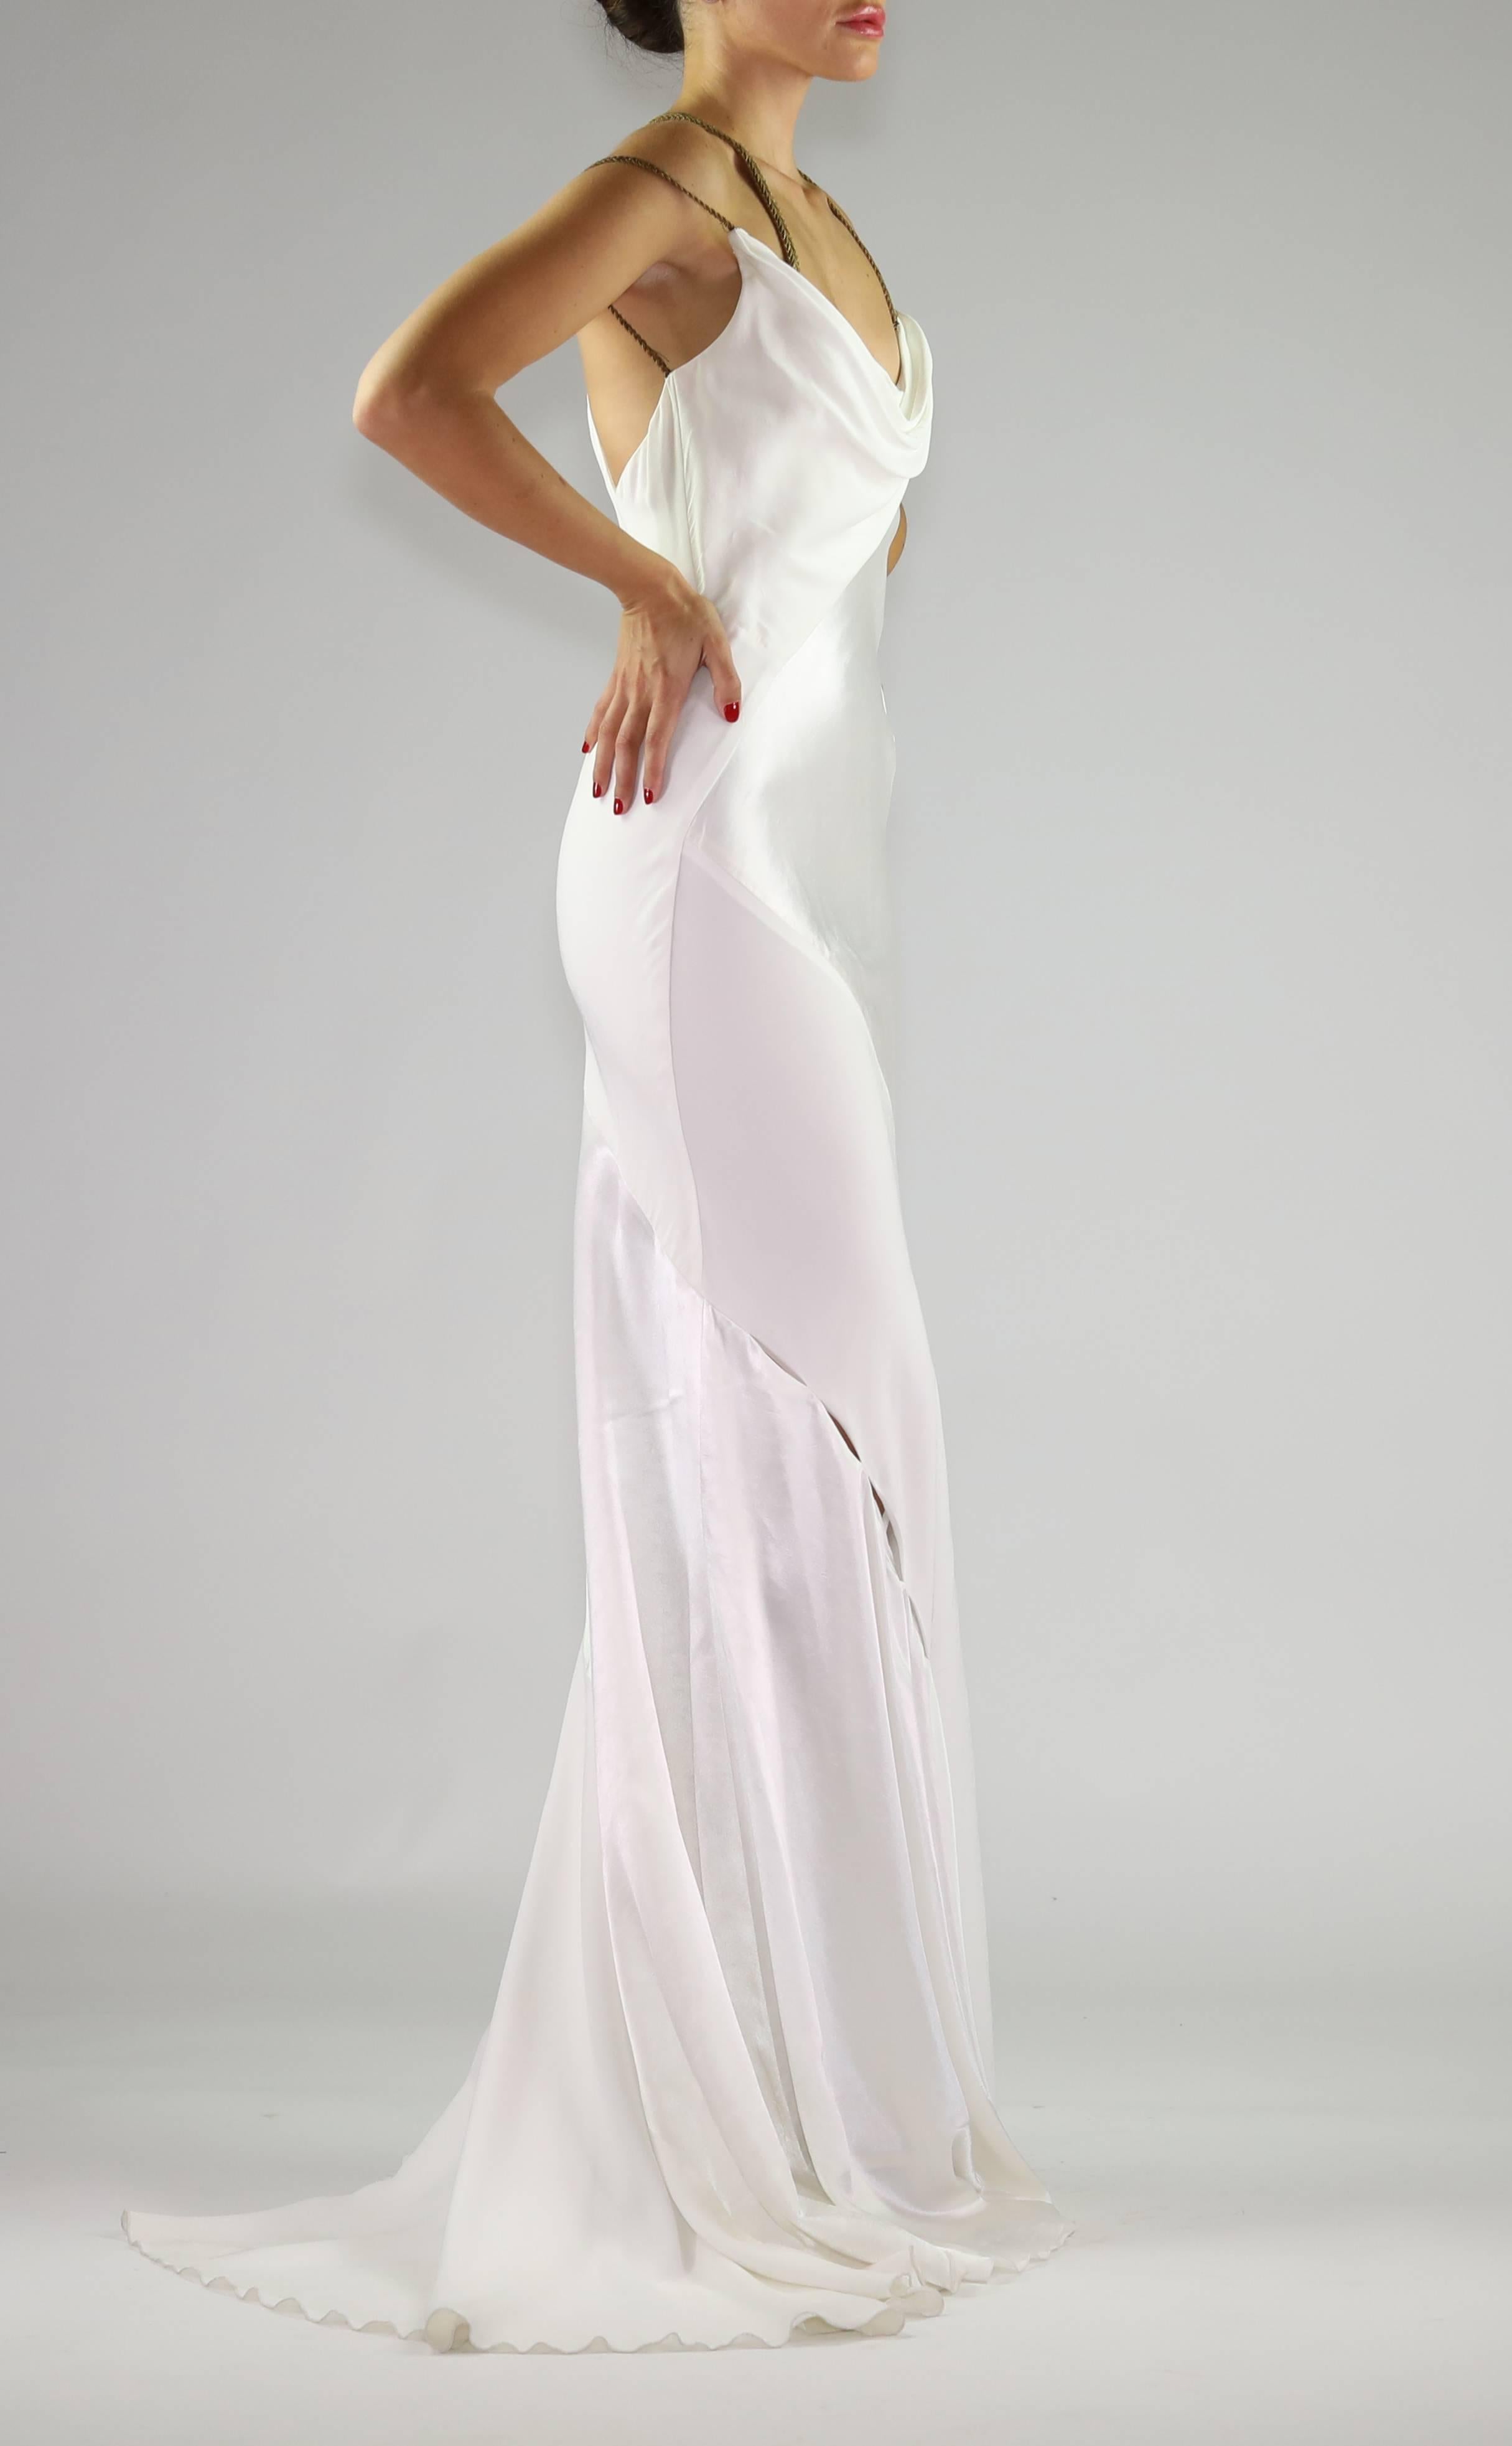 Women's F/W 2014 Look # 51 NEW VERSACE WHITE GOWN DRESS as seen on Heidi 38 - 2 For Sale